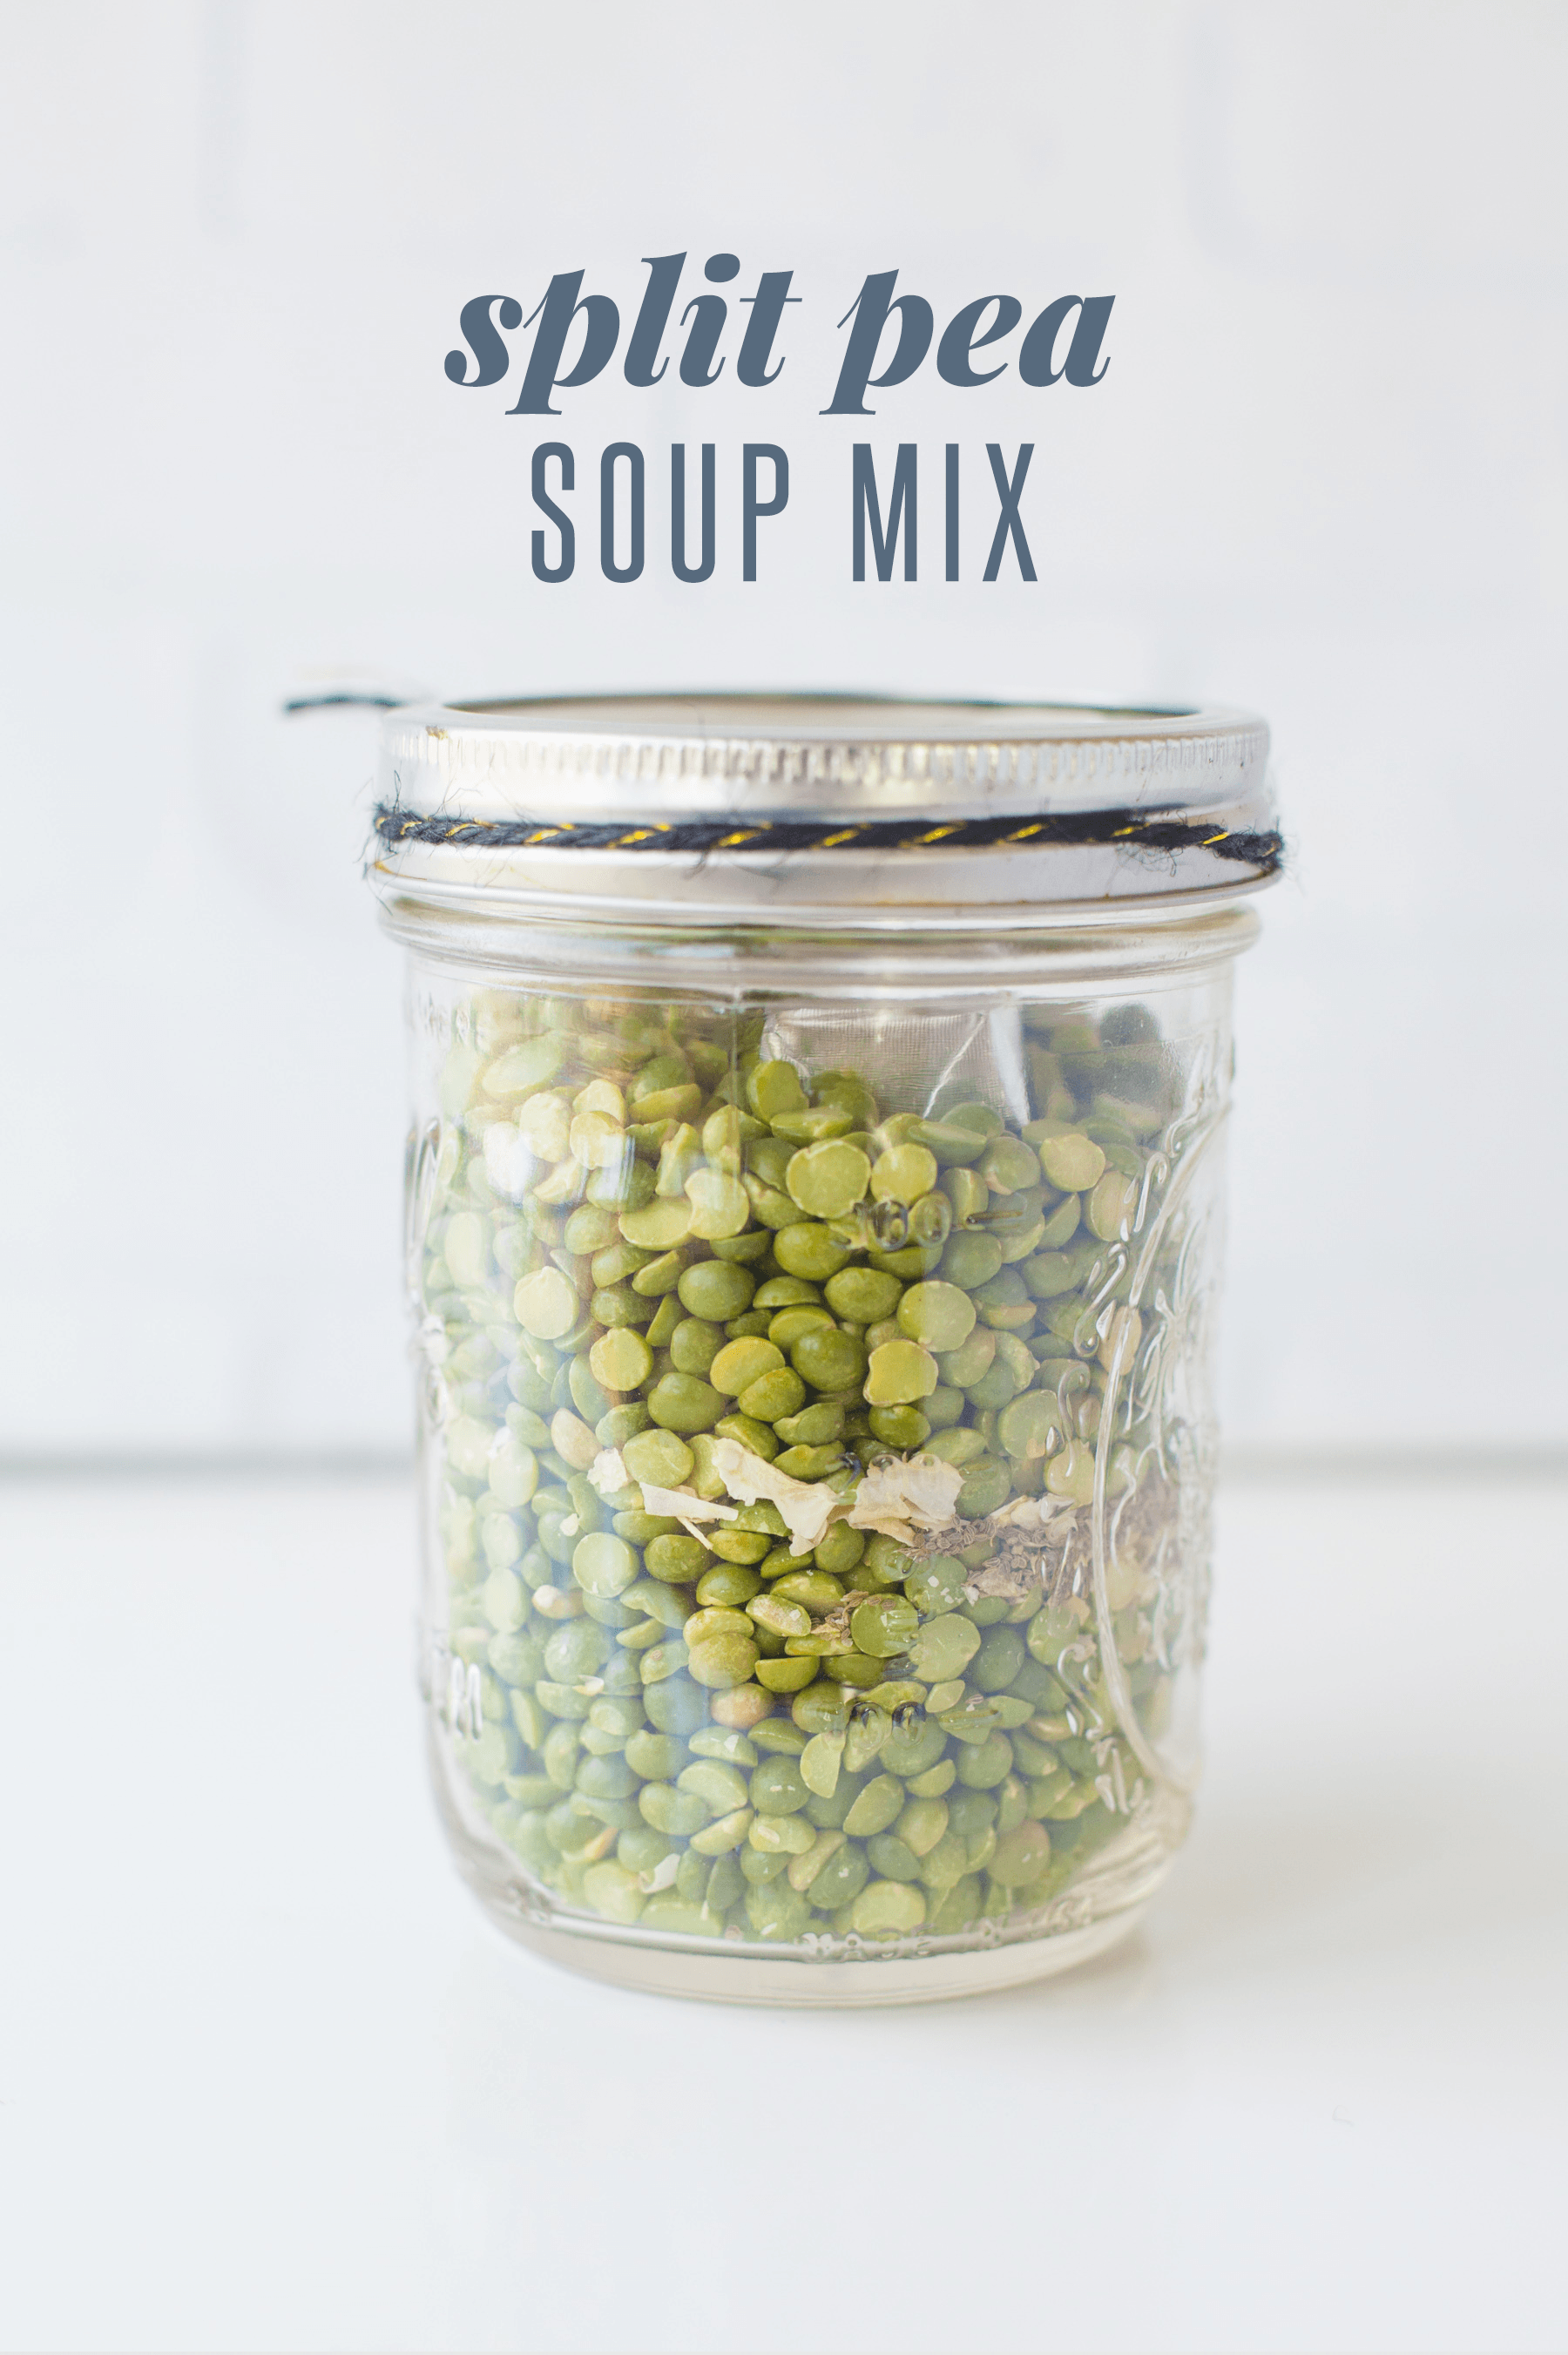 Mason jar full of split peas and spices. A text overlay reads "Split Pea Soup Mix"